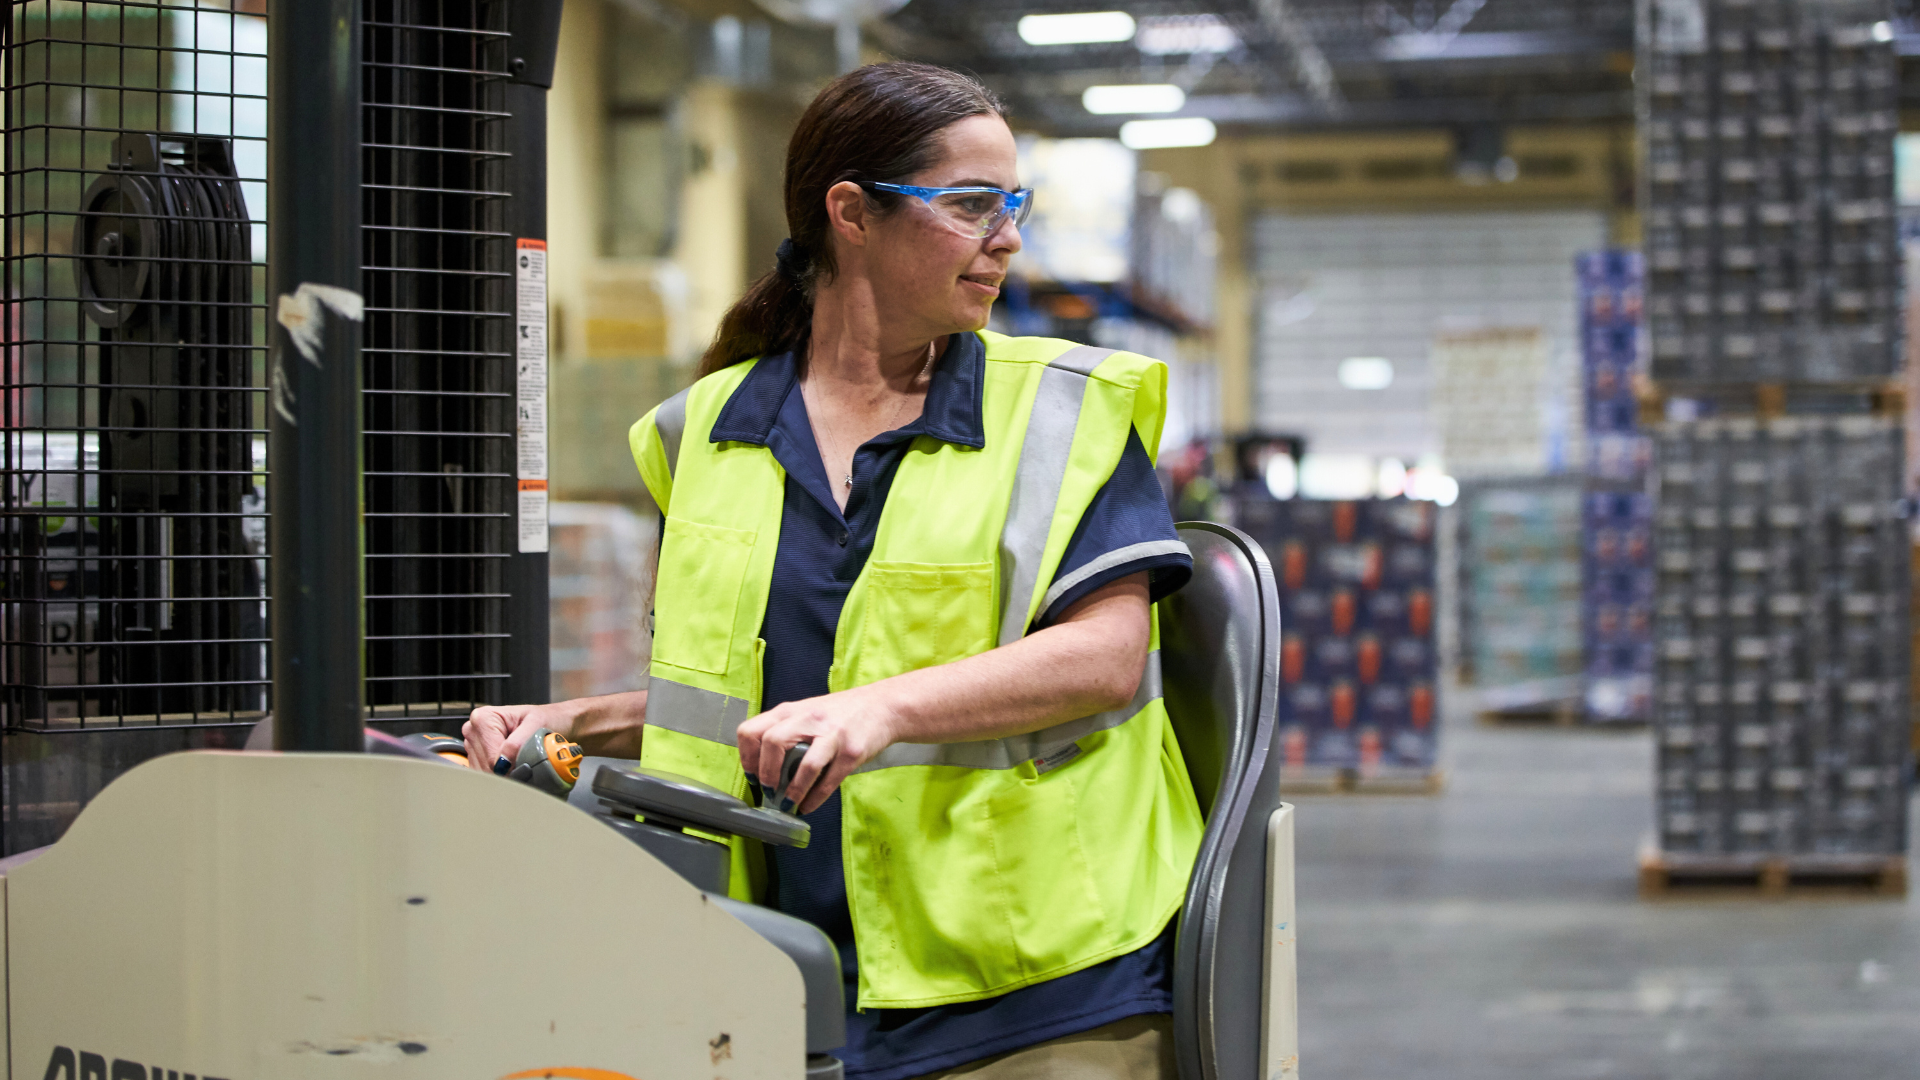 Woman wearing safety vest and safety goggles while operating a forklift in a warehouse